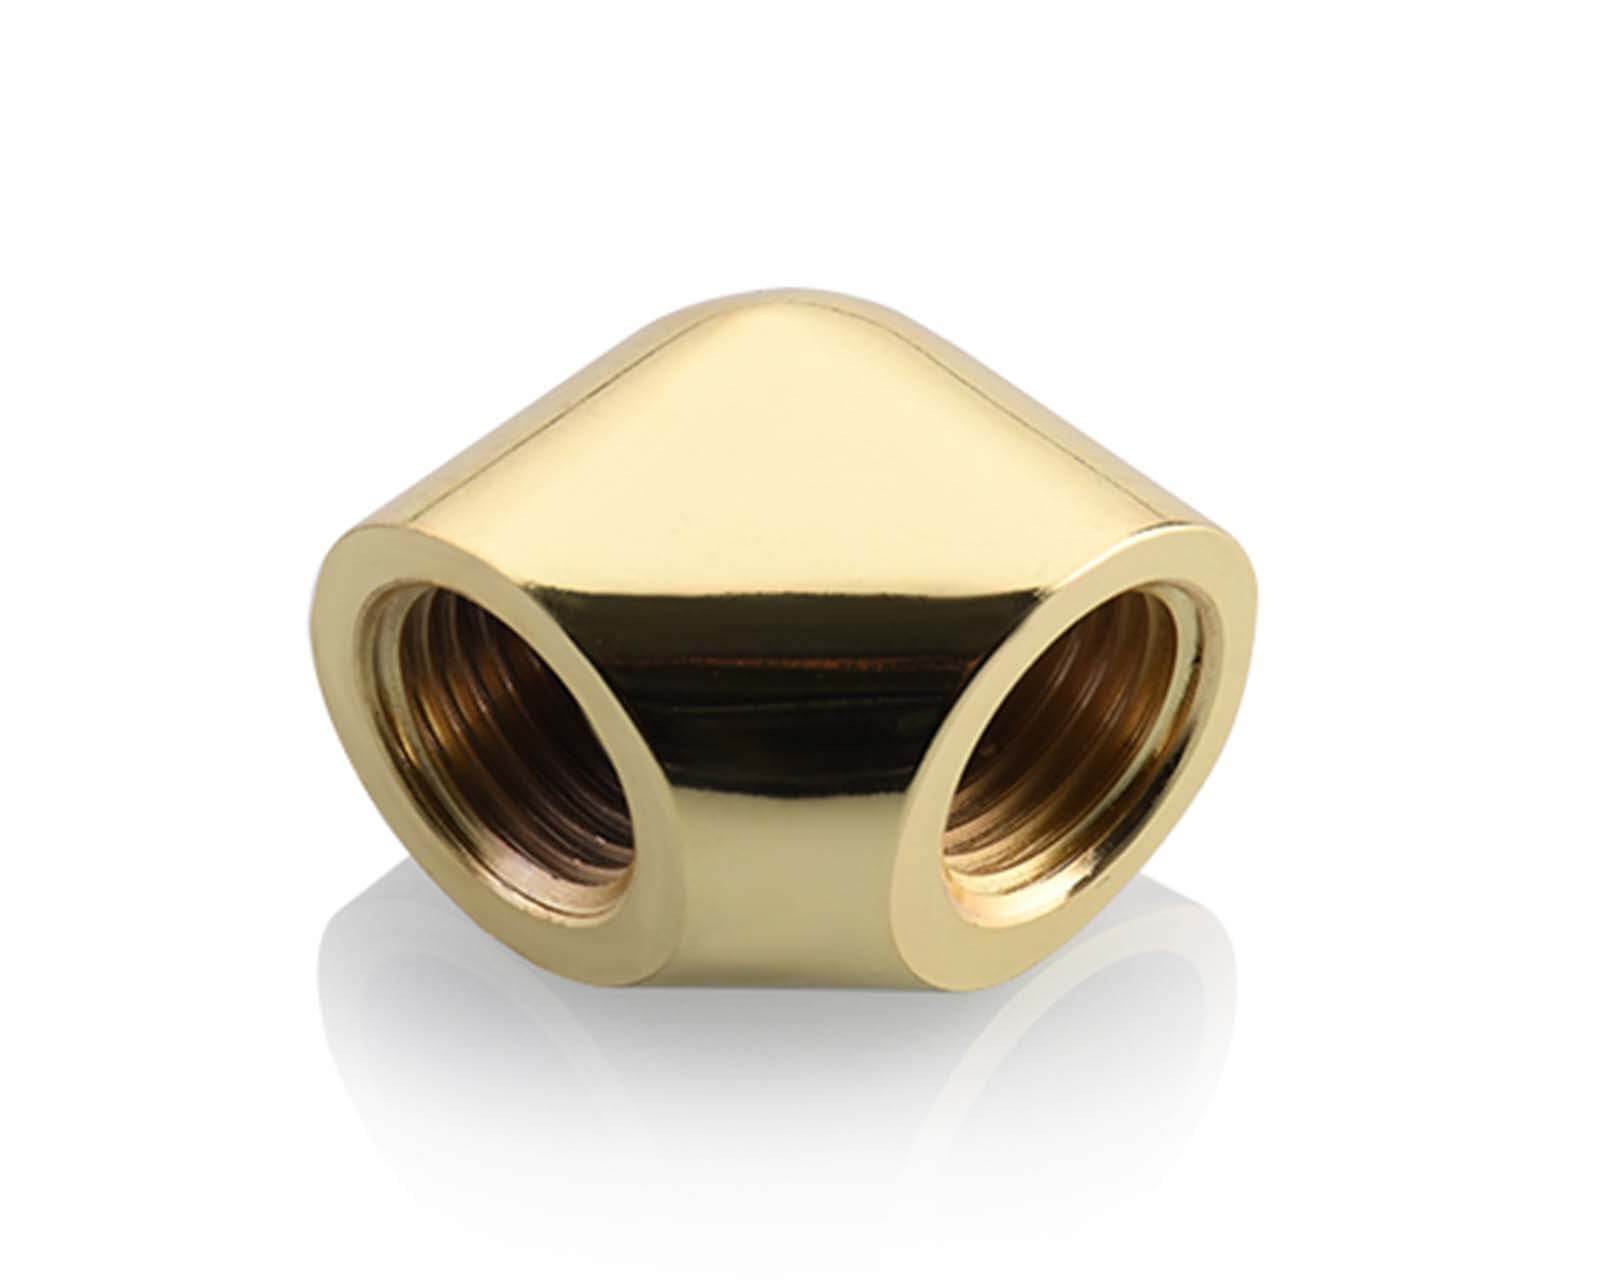 Bykski Female to Female G 1/4in. 90 Degree Extended Elbow Fitting (CC-EW90-V2) - PrimoChill - KEEPING IT COOL Gold